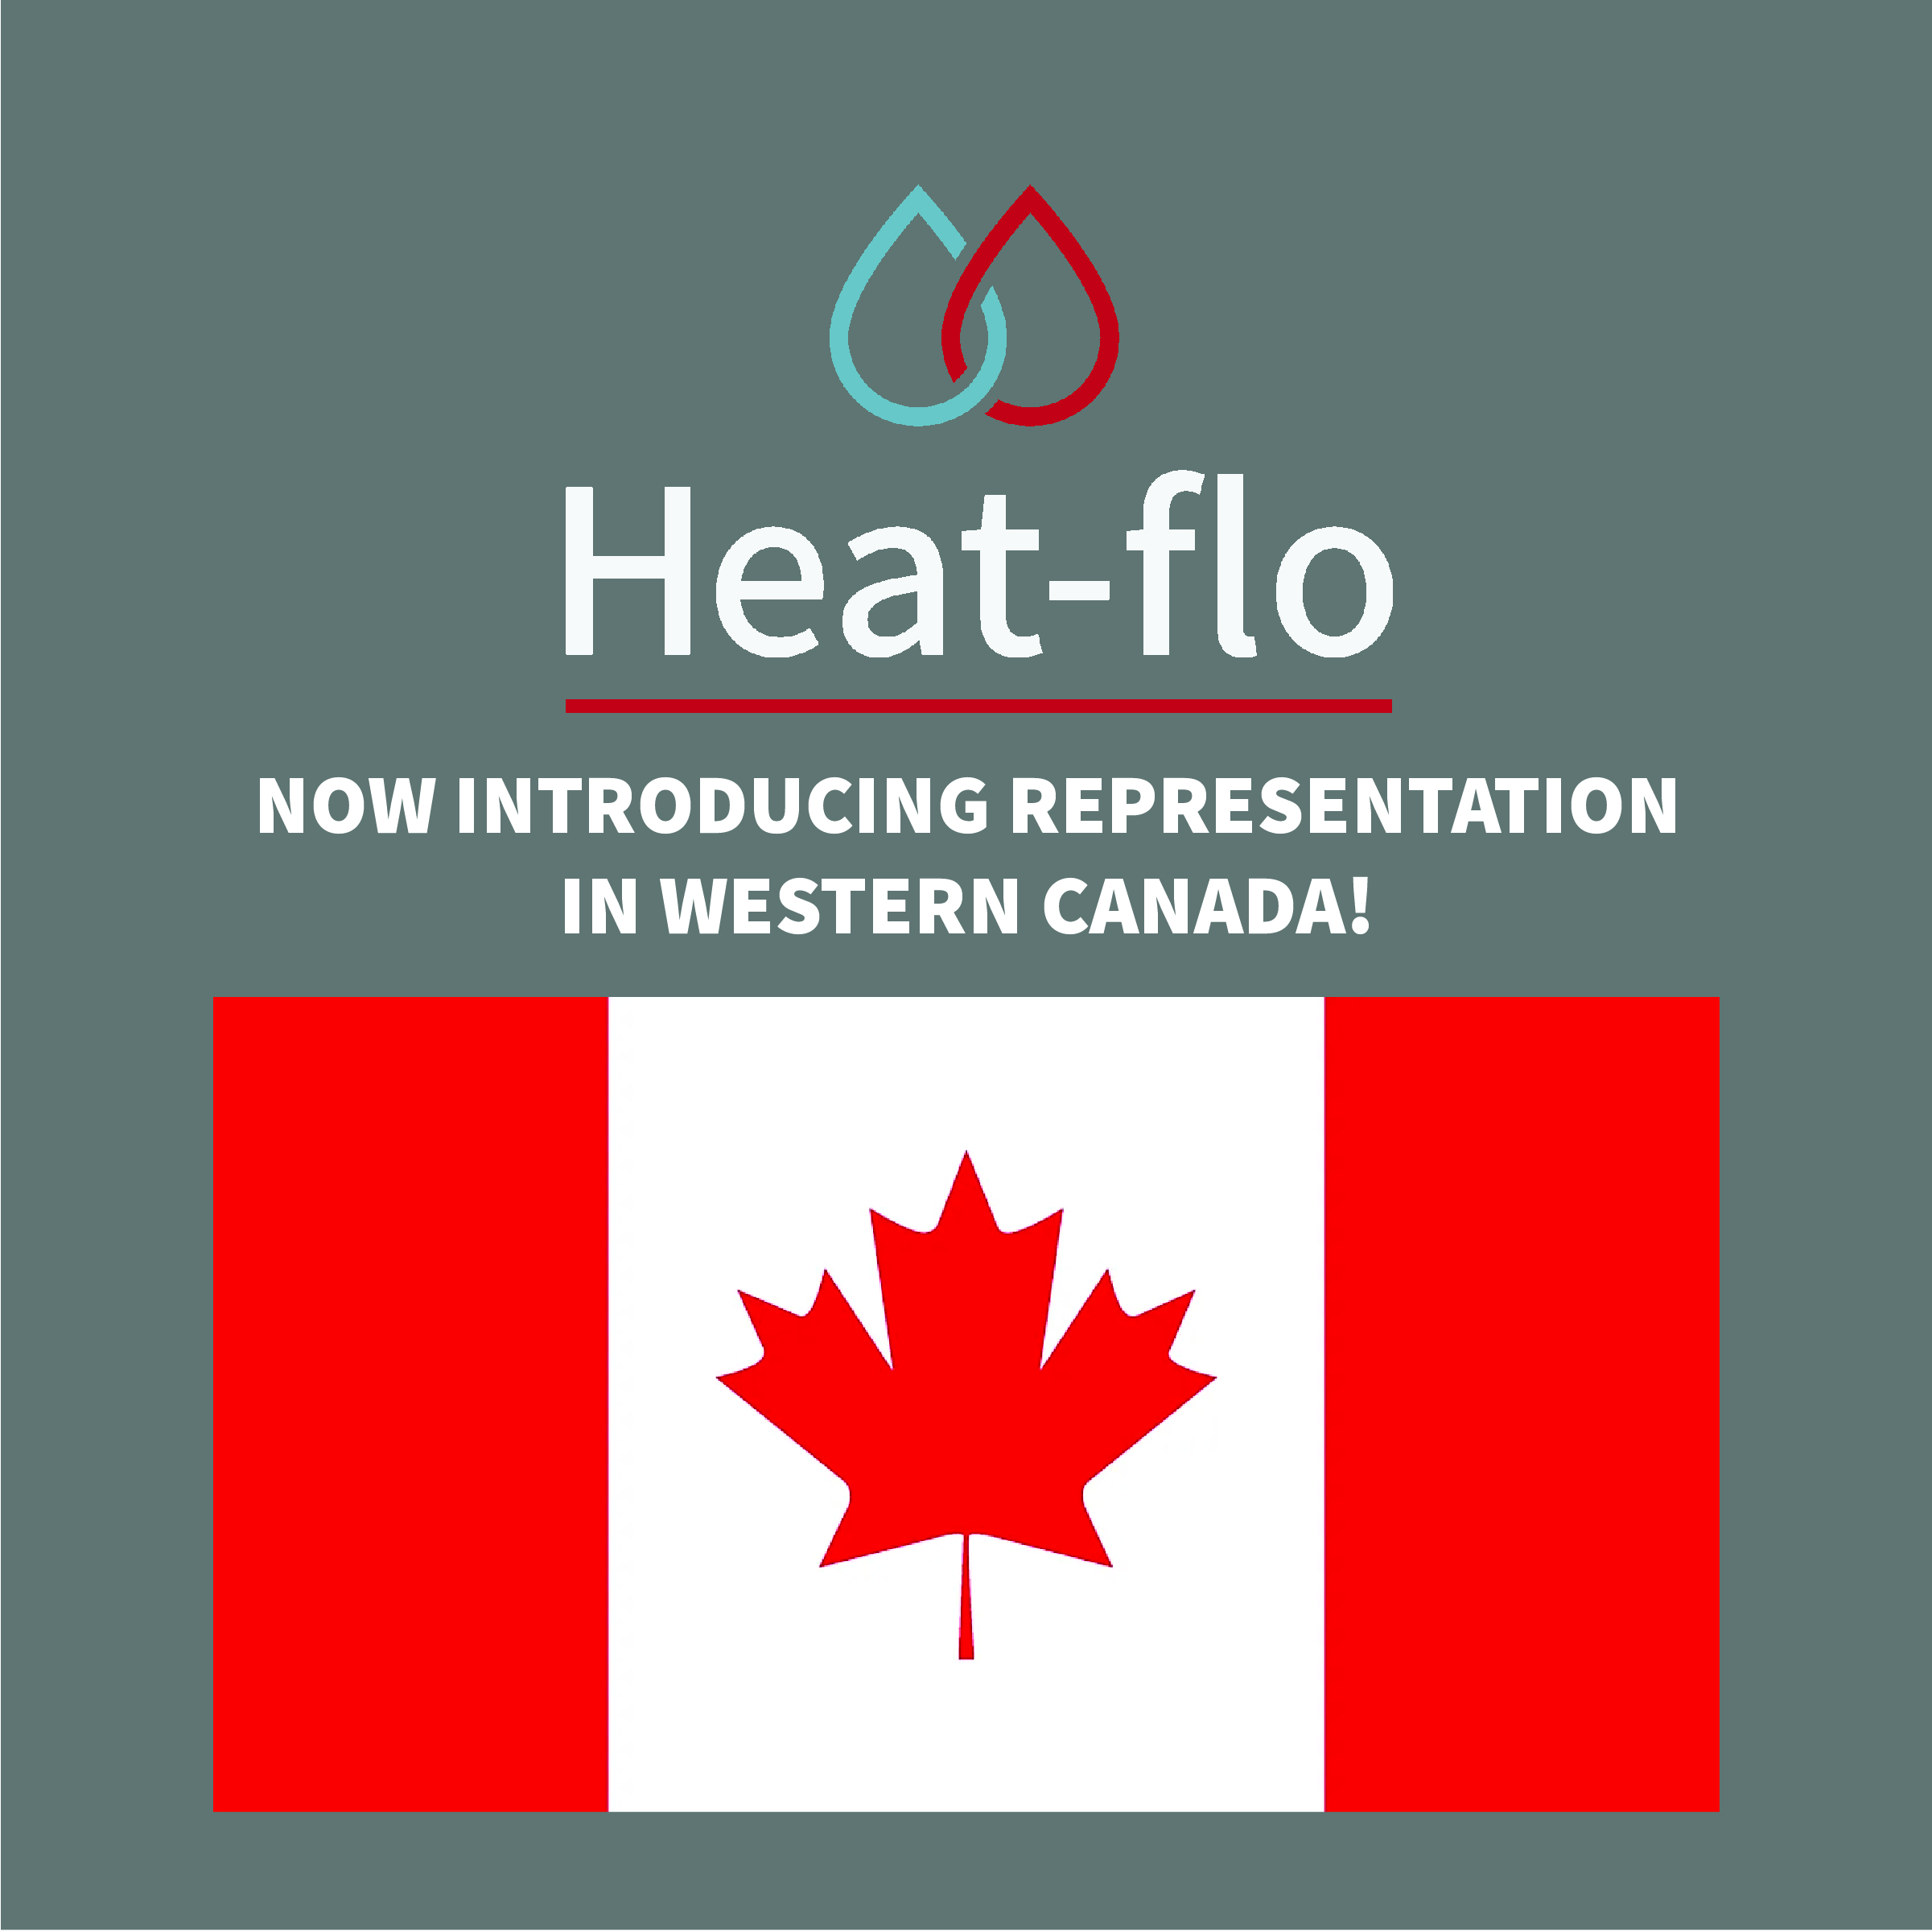 Heat-flo is now introducing representation in Western Canada